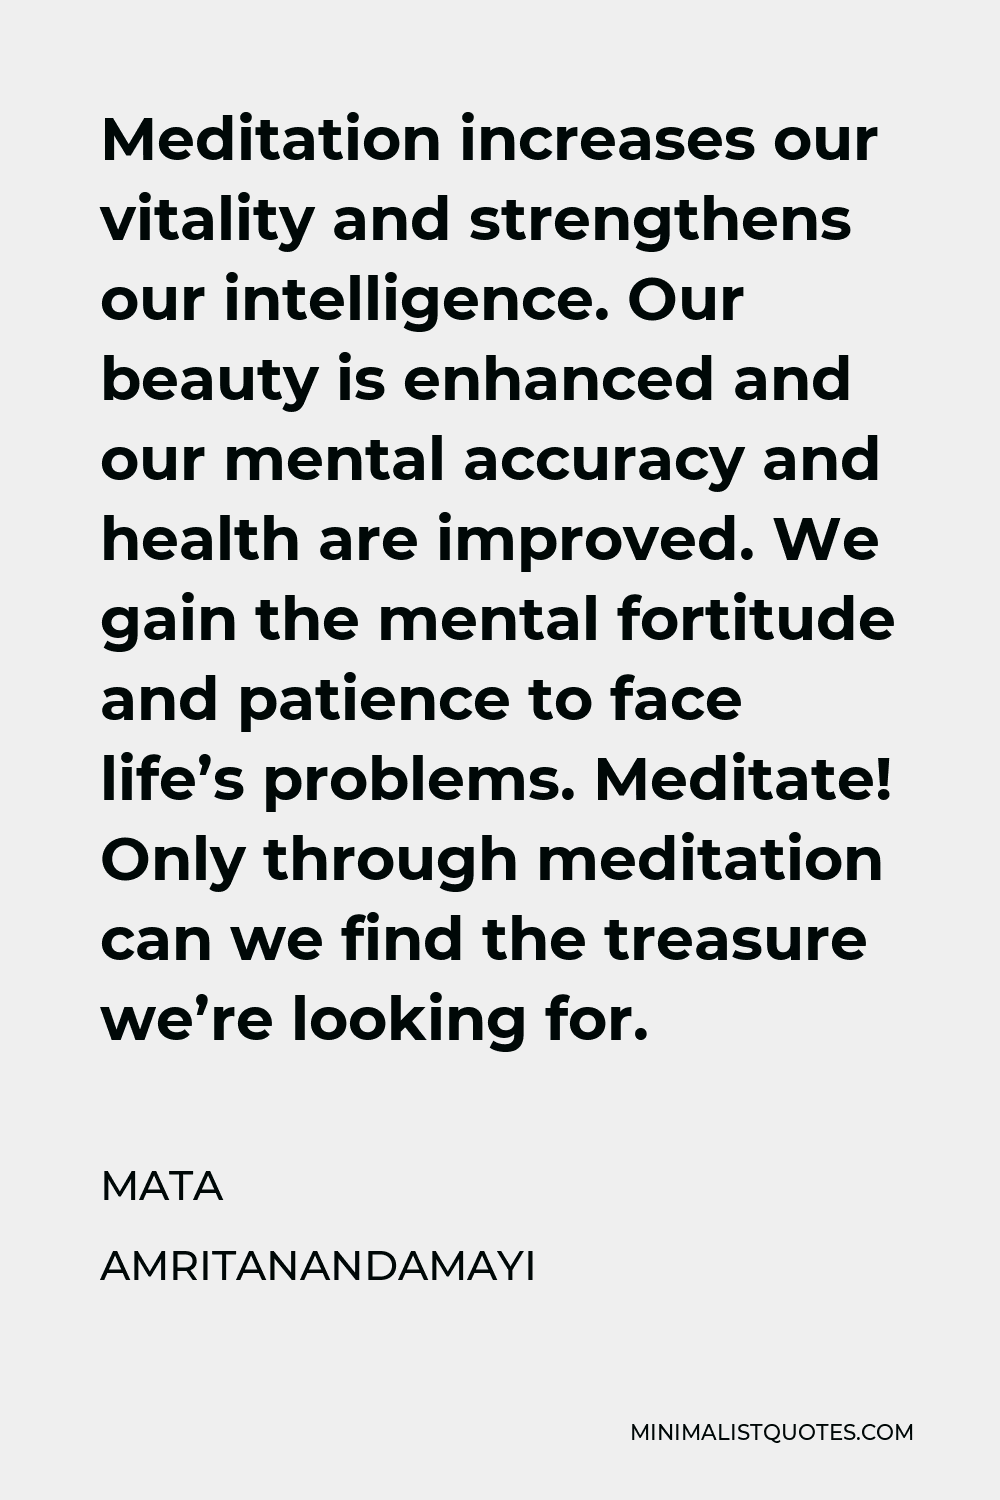 Mata Amritanandamayi Quote - Meditation increases our vitality and strengthens our intelligence. Our beauty is enhanced and our mental accuracy and health are improved. We gain the mental fortitude and patience to face life’s problems. Meditate! Only through meditation can we find the treasure we’re looking for.